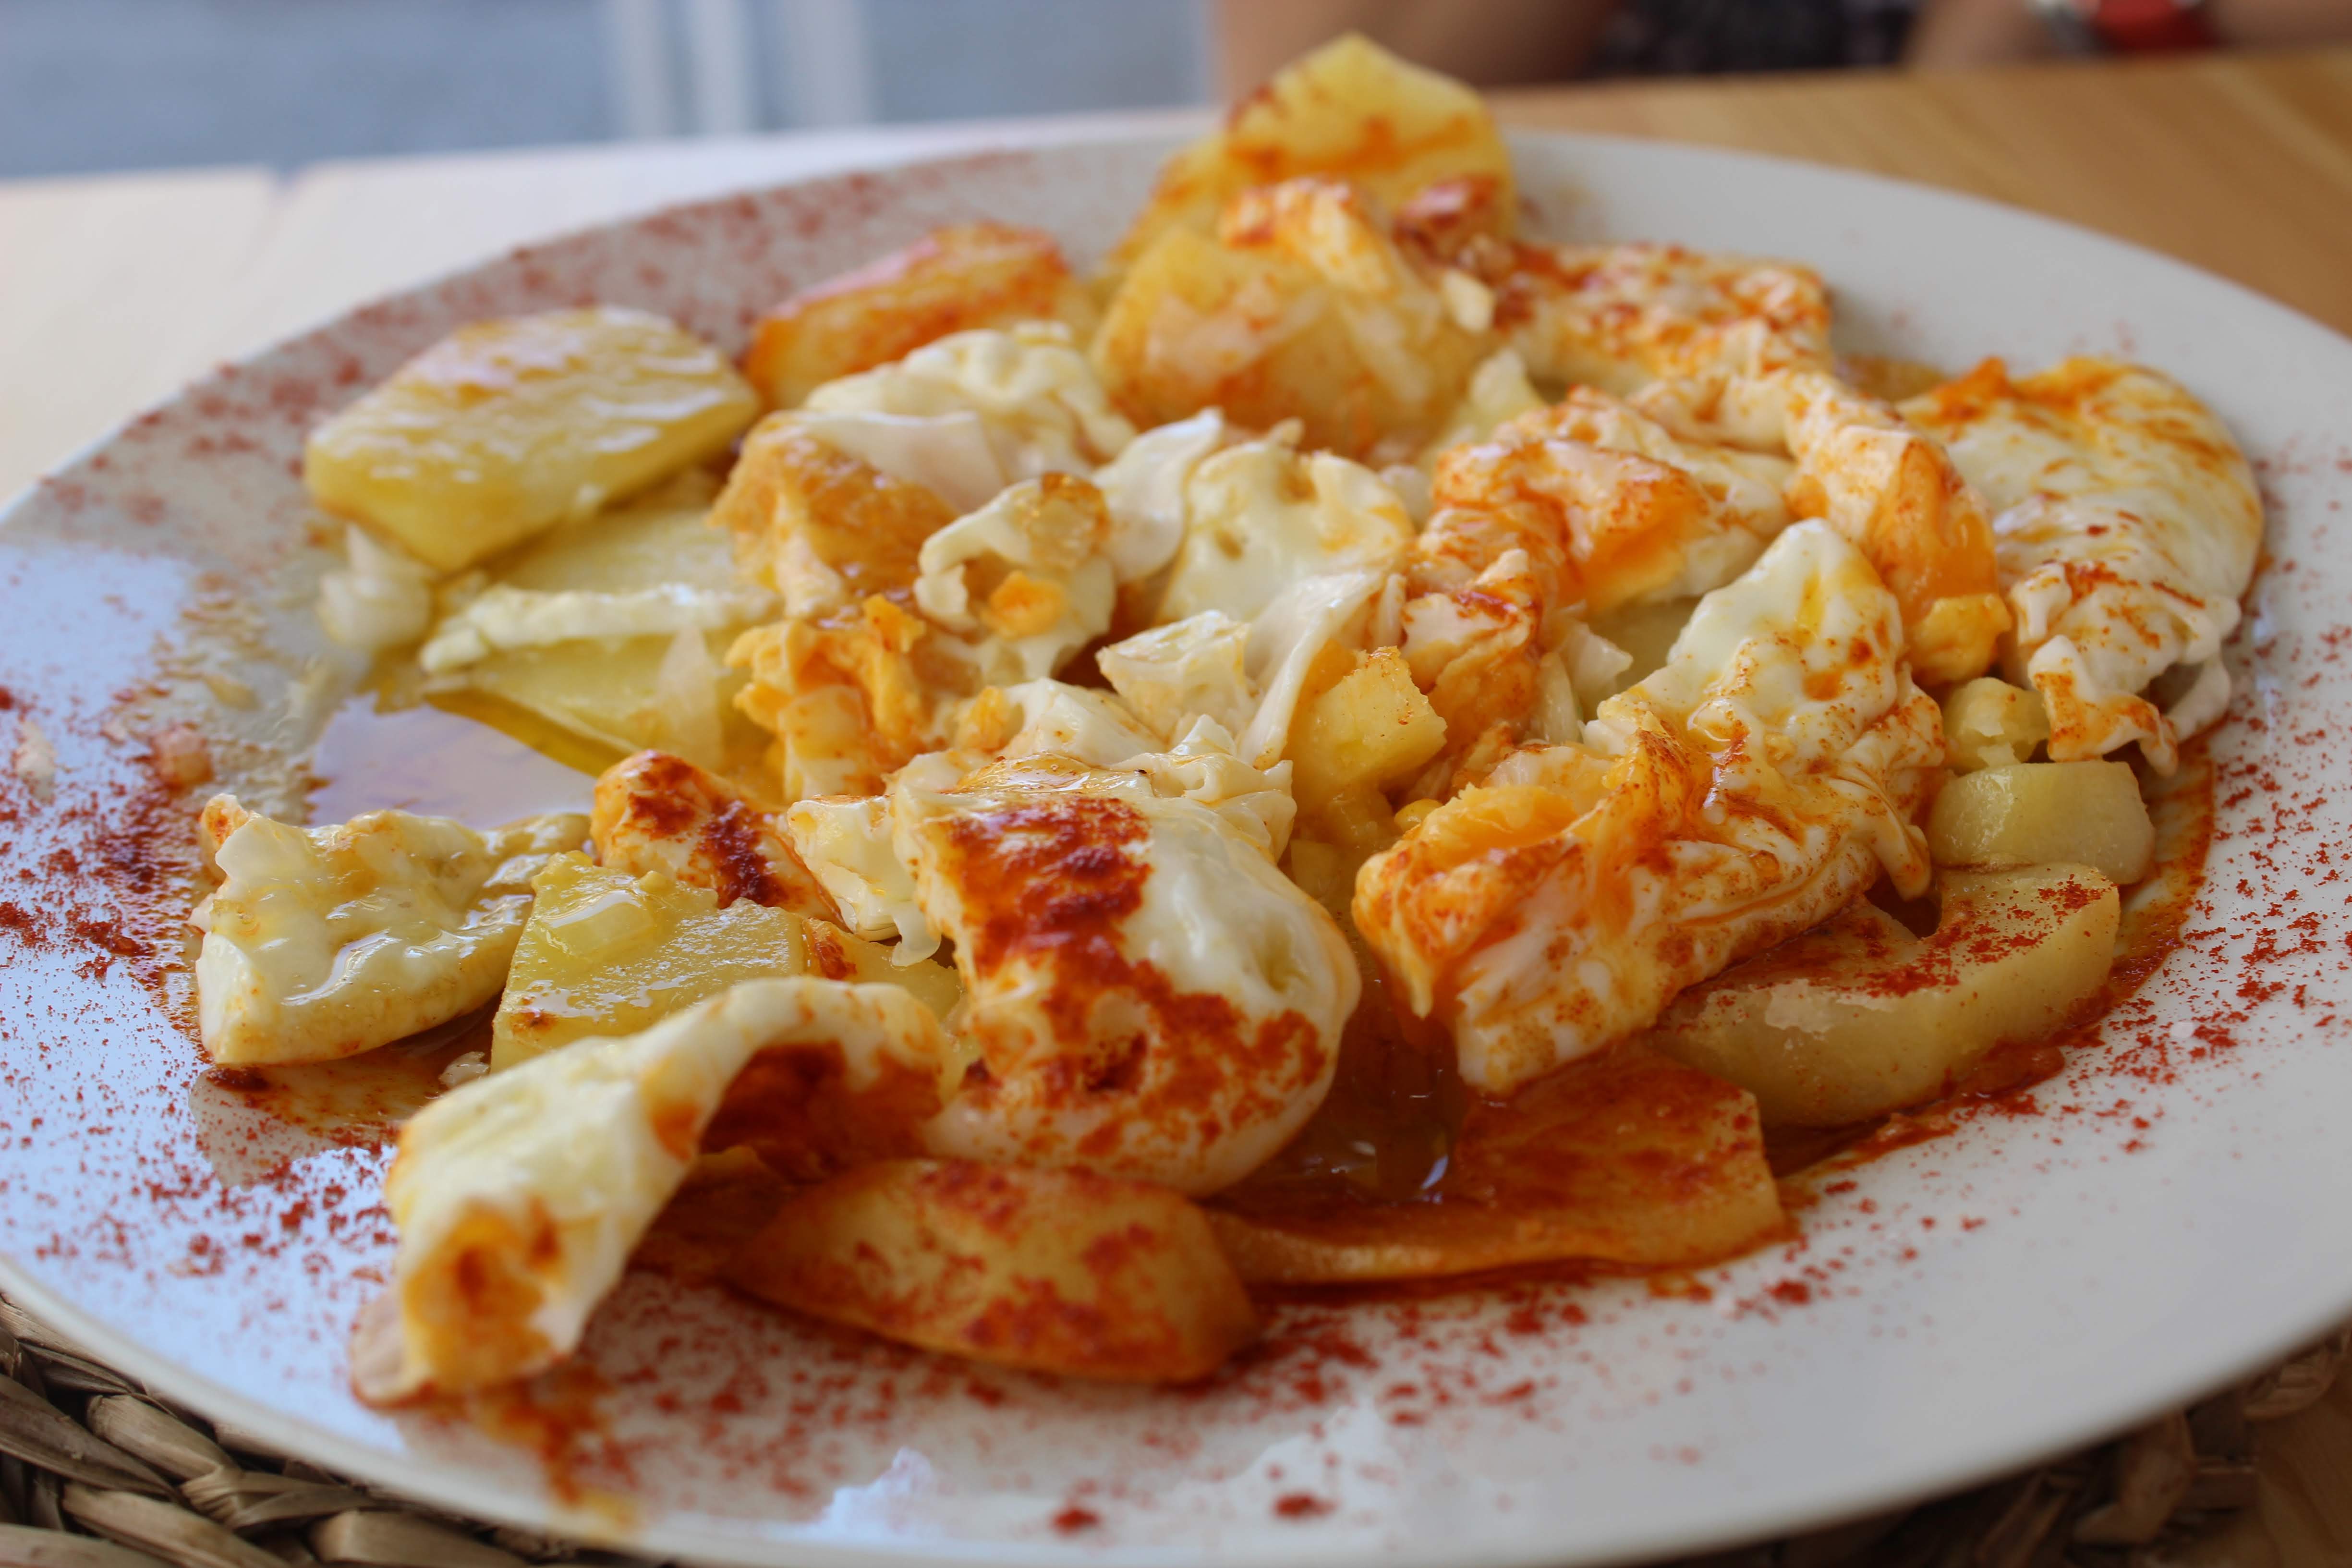 Spanish eggs, garnished with paprika.